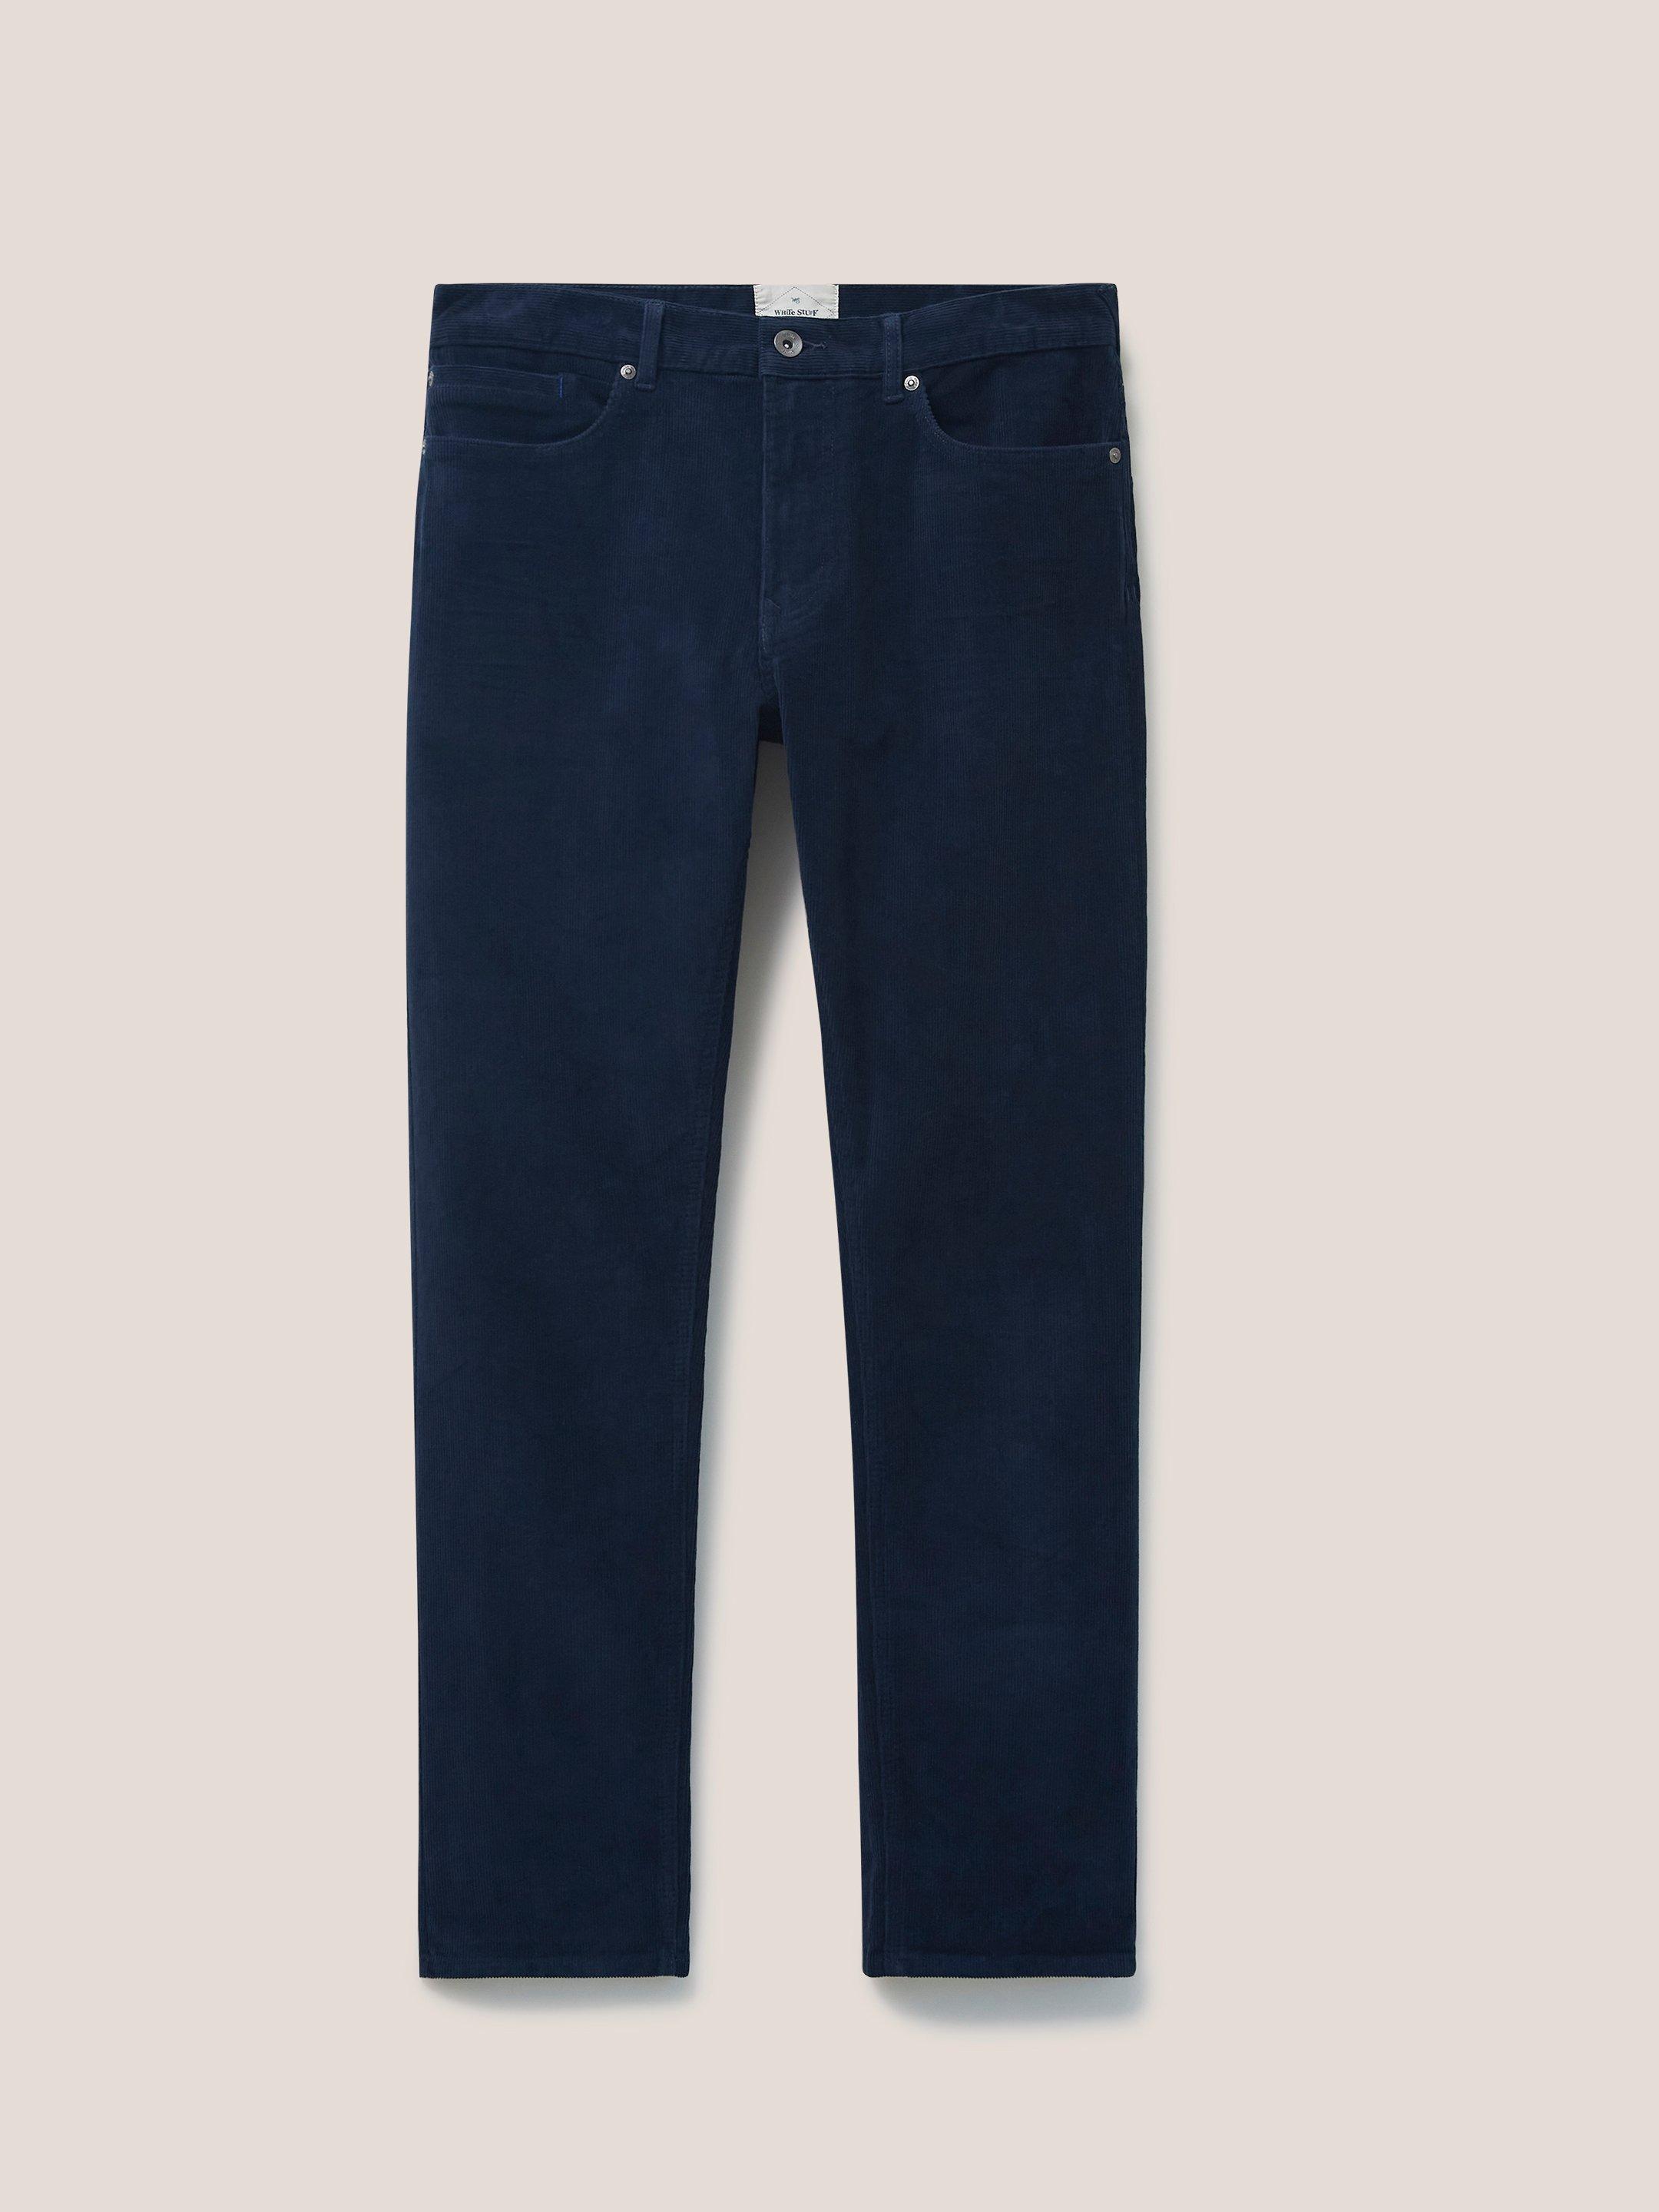 Crosby Cord Trouser in DARK NAVY - FLAT FRONT